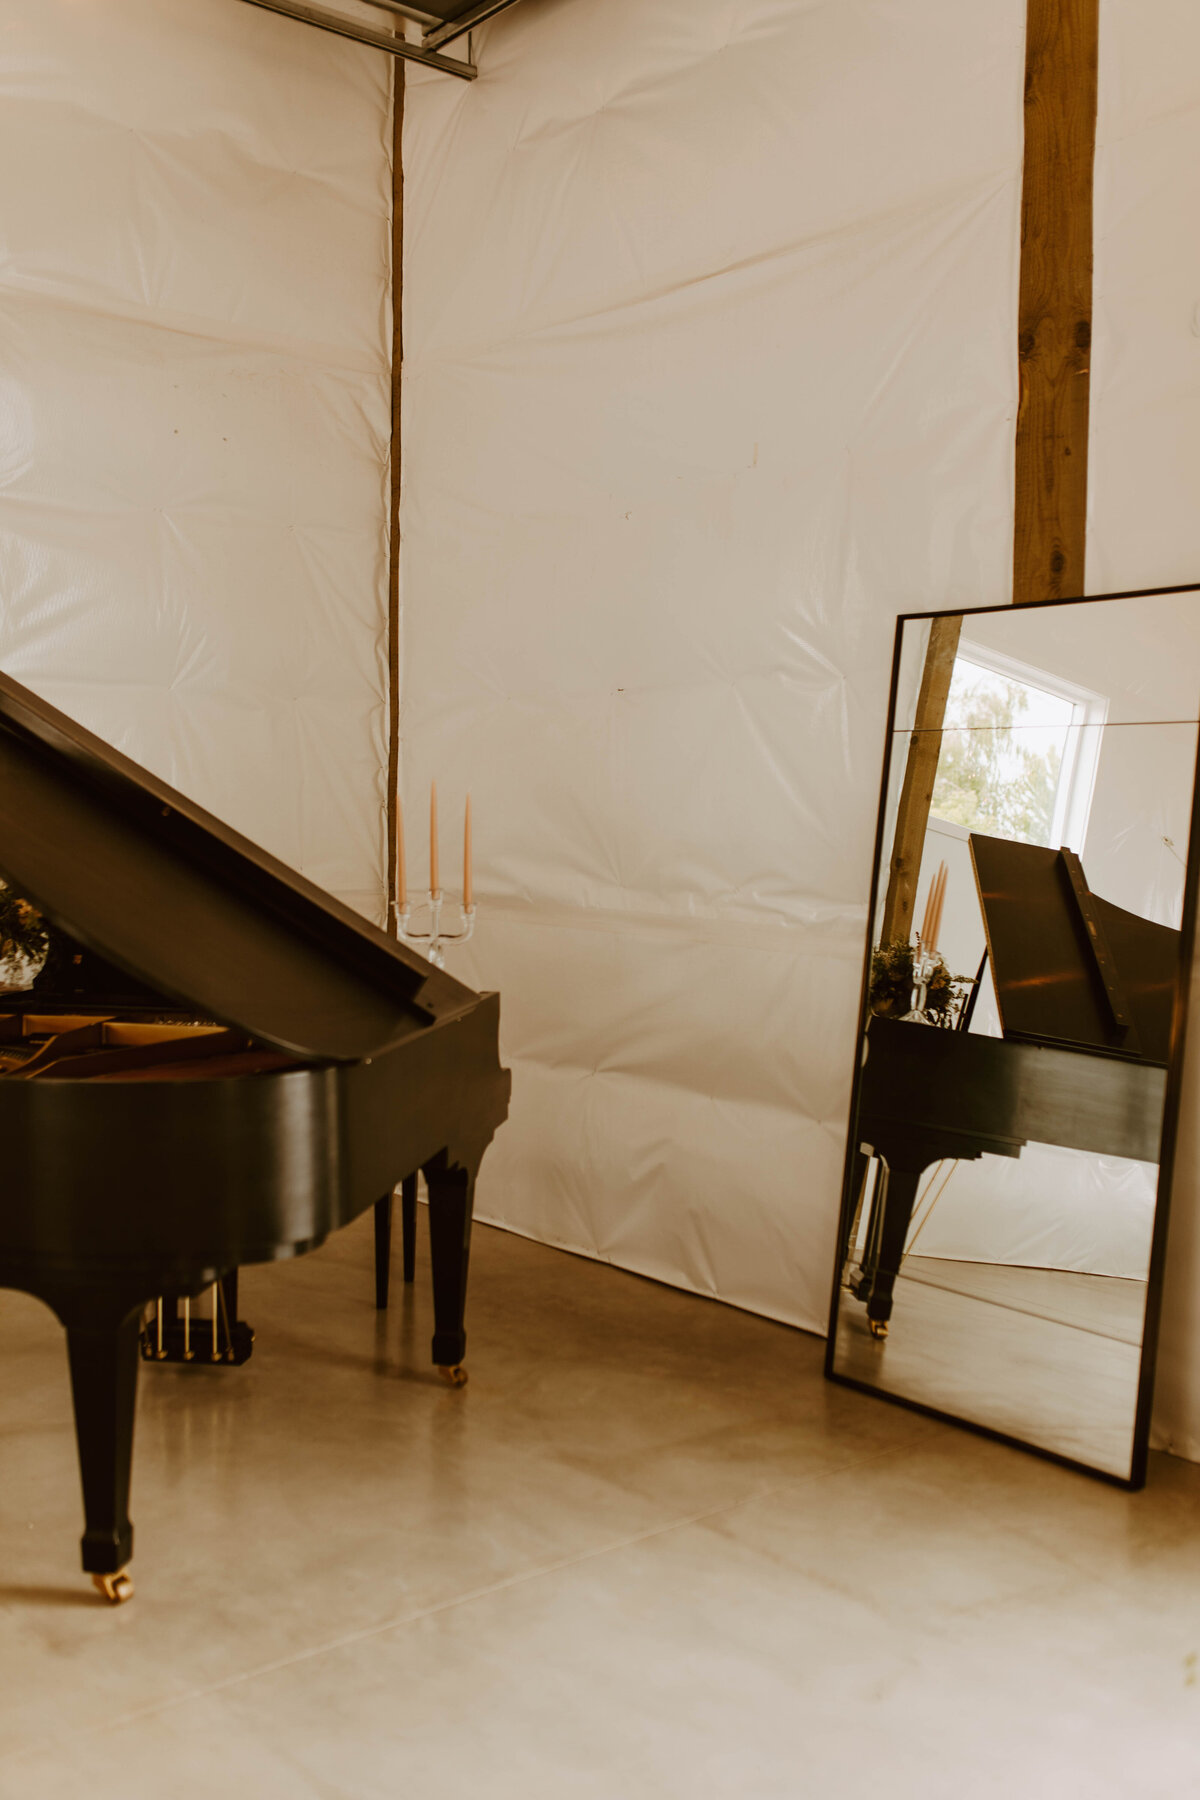 Vertical photo where a grand piano is half in frame and a large mirror rests against a wall to the right, reflecting it.